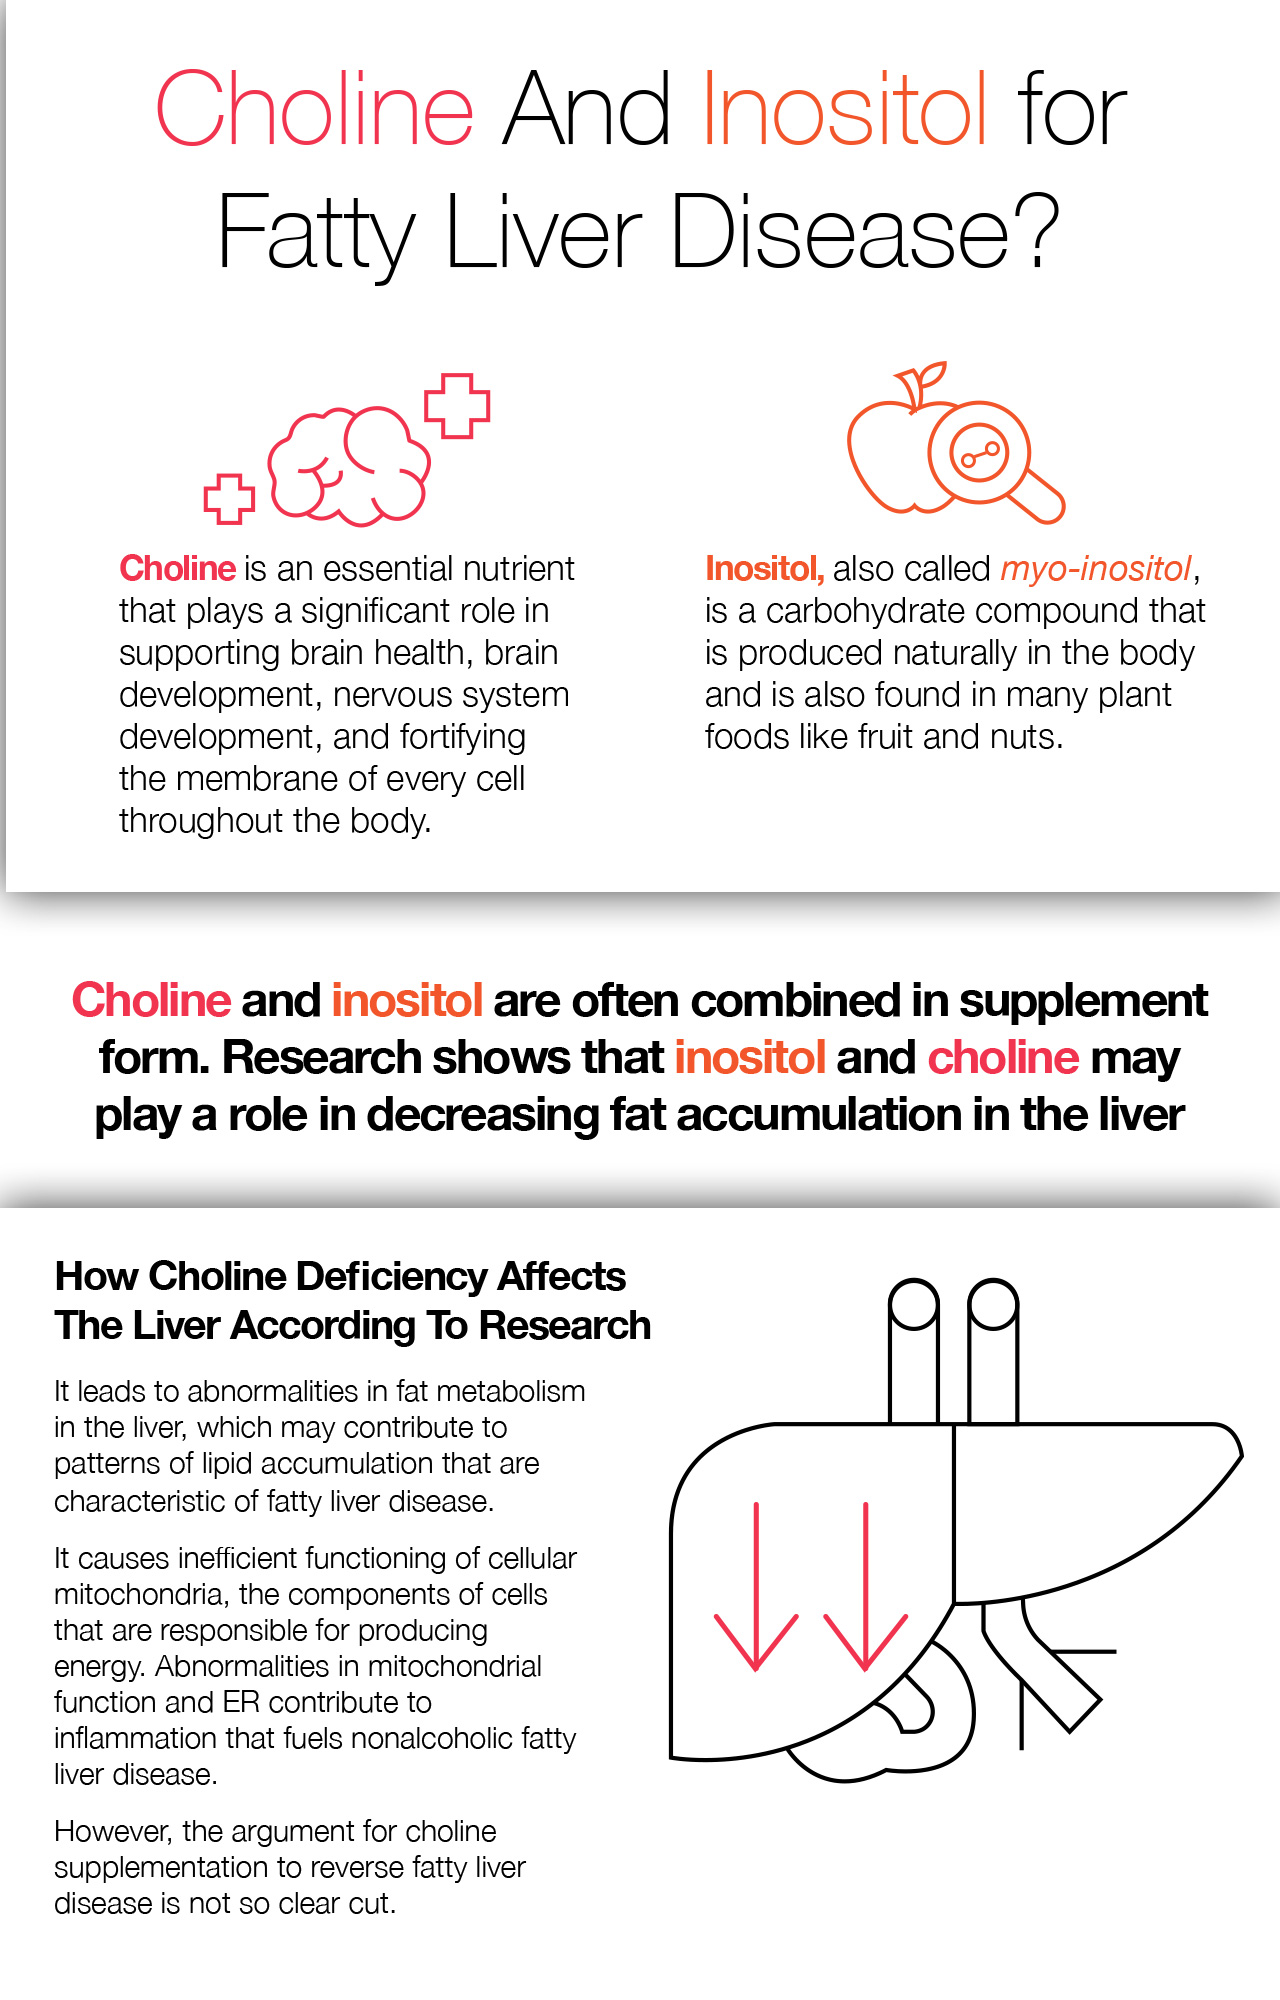 Choline And Inositol for Fatty Liver Disease